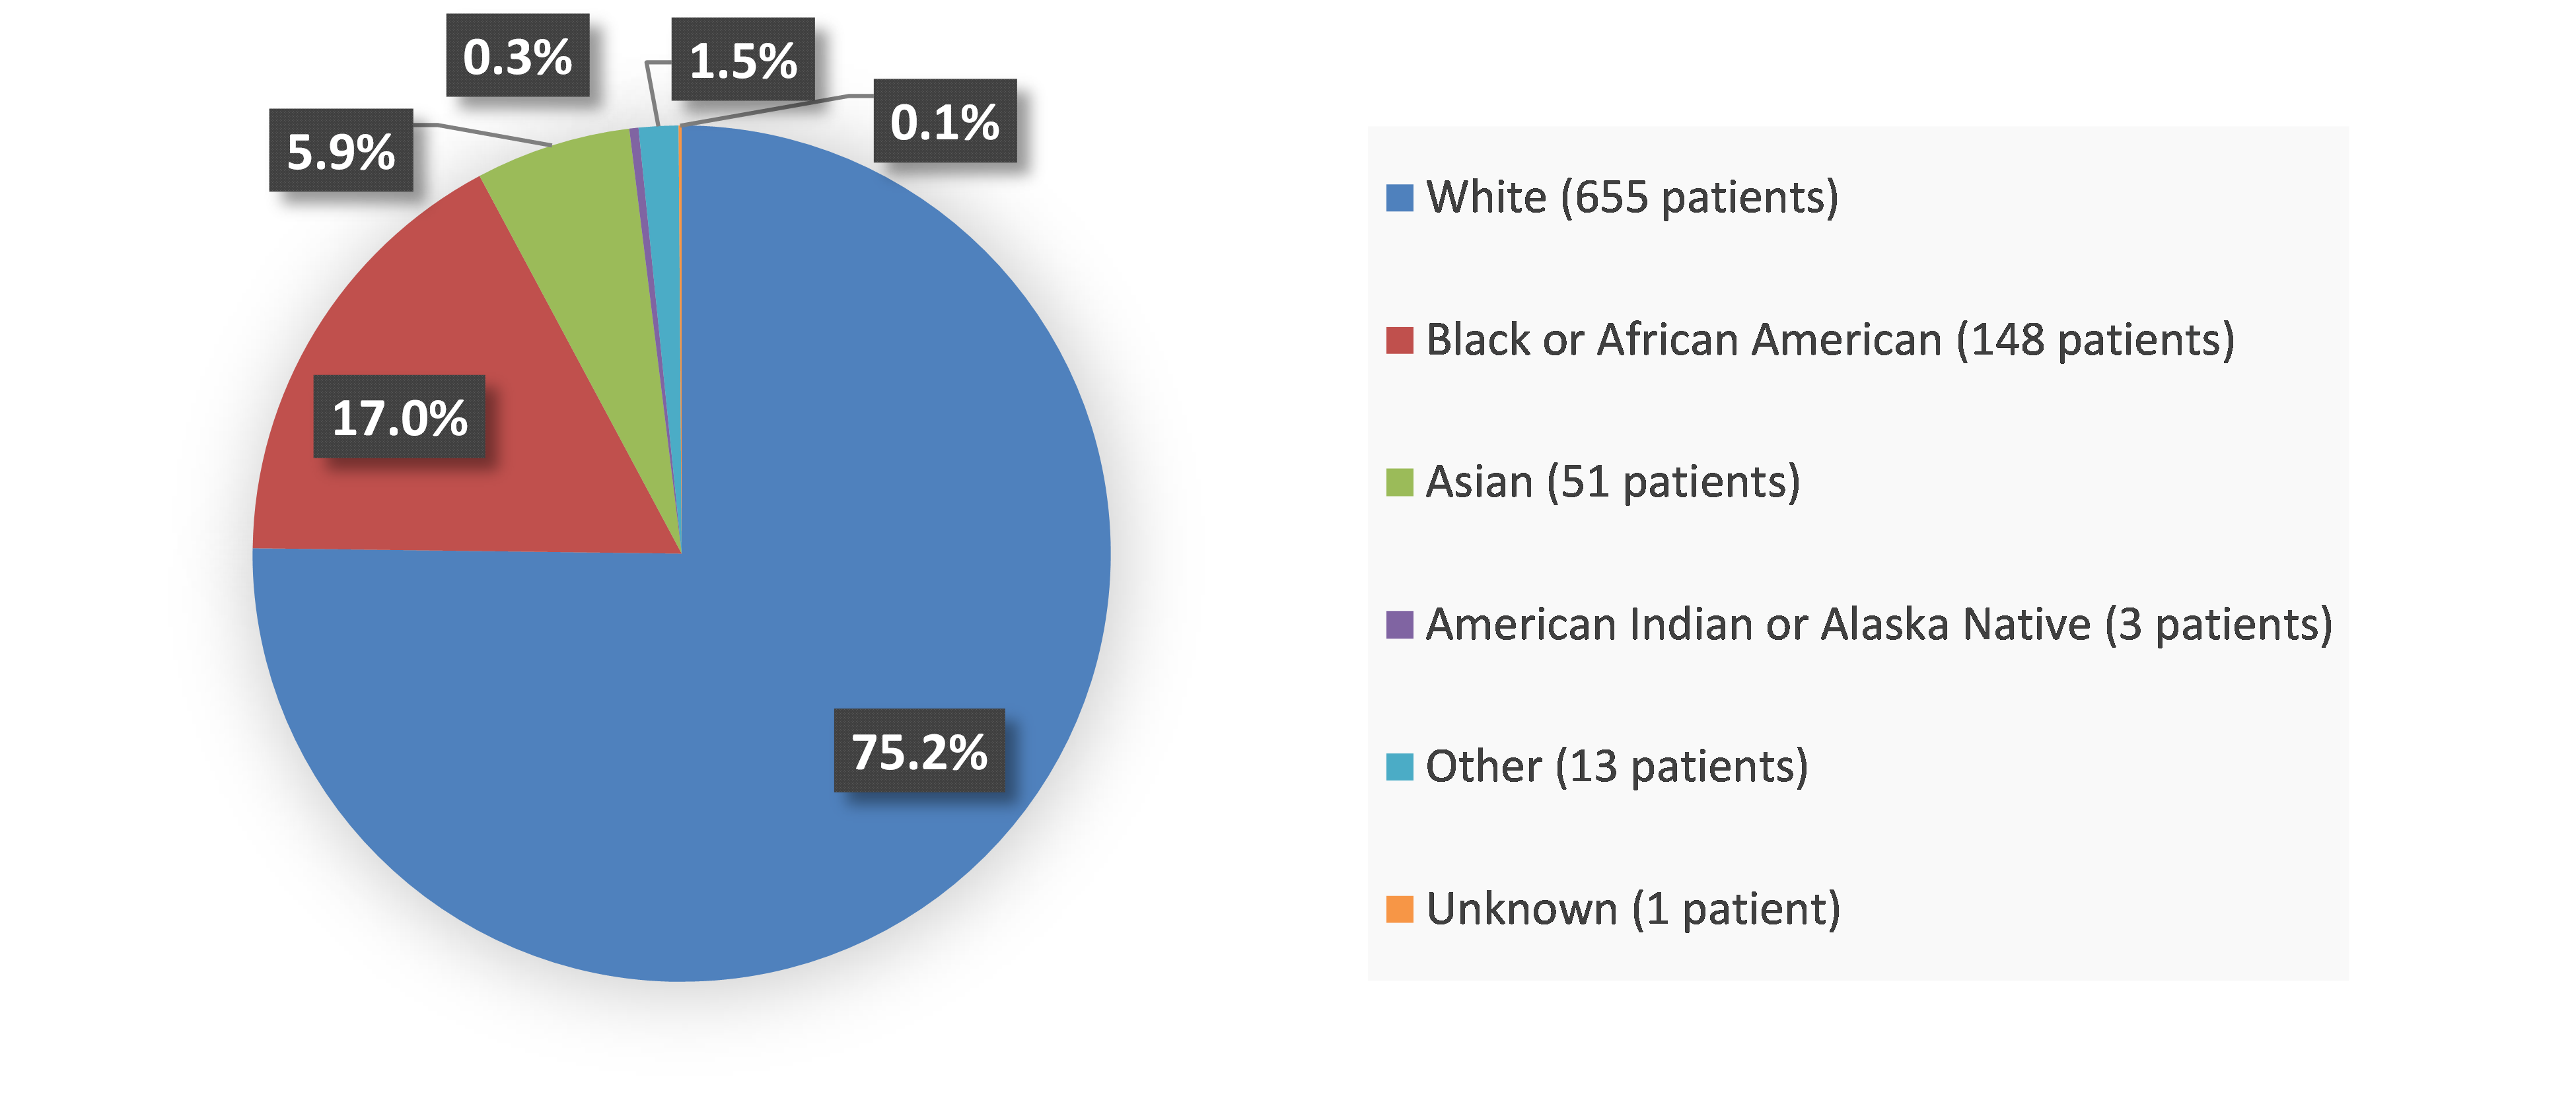 Pie chart summarizing how many White, Black or African American, Asian, American Indian or Alaska Native, other, and unknown patients were in the clinical trial. In total, 655 (75.2%) White patients, 148 (17.0%) Black or African American patients, 51 (5.9%) Asian patients, 3 (0.3%) American Indian or Alaska Native patients, 13 (1.5%) Other patients; and 1 (0.1%) Unknown patient participated in the clinical trial.